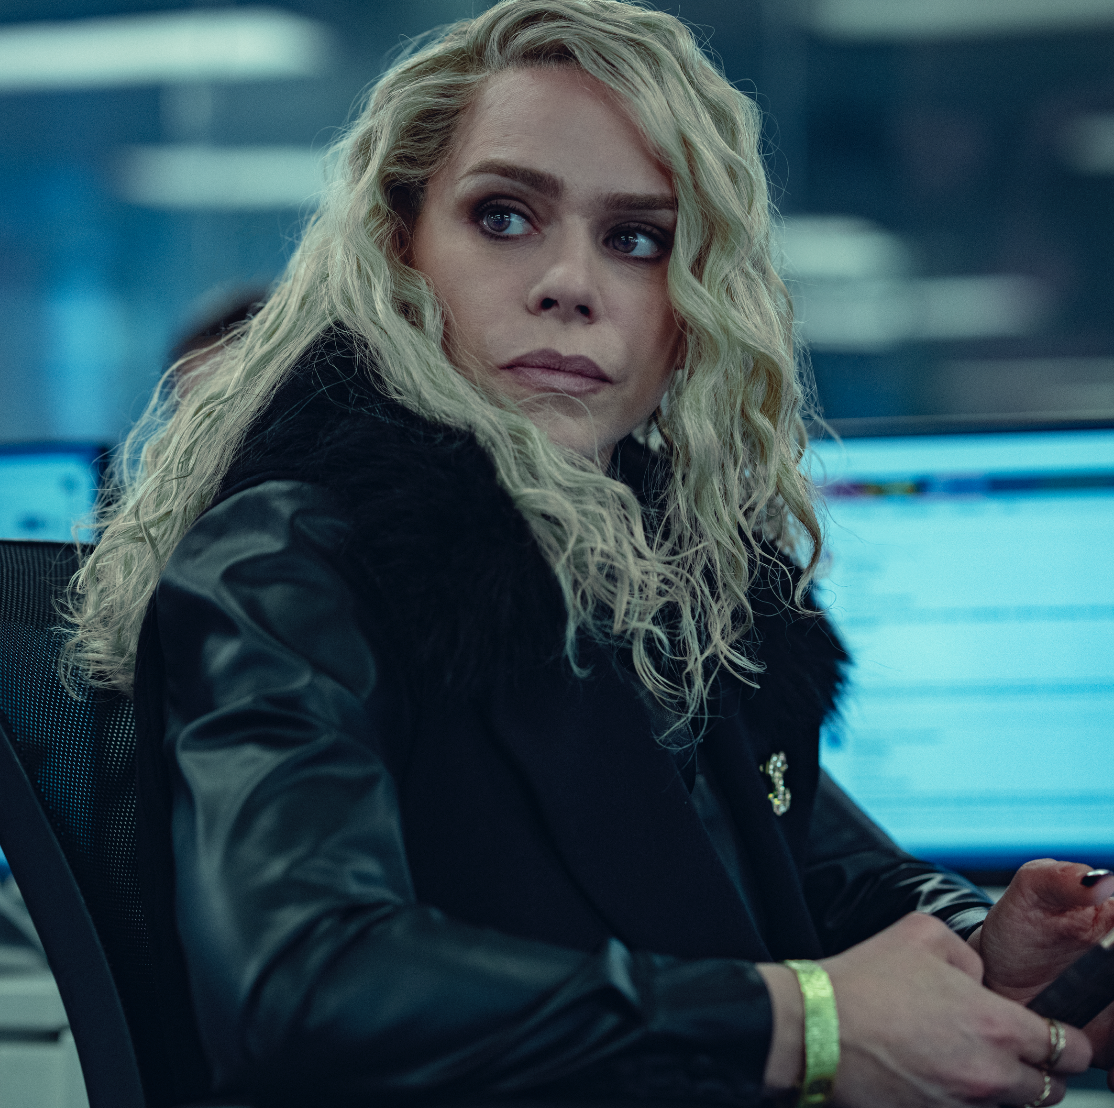 In the Netflix film, Piper plays the woman responsible for Prince Andrew's infamous BBC interview.